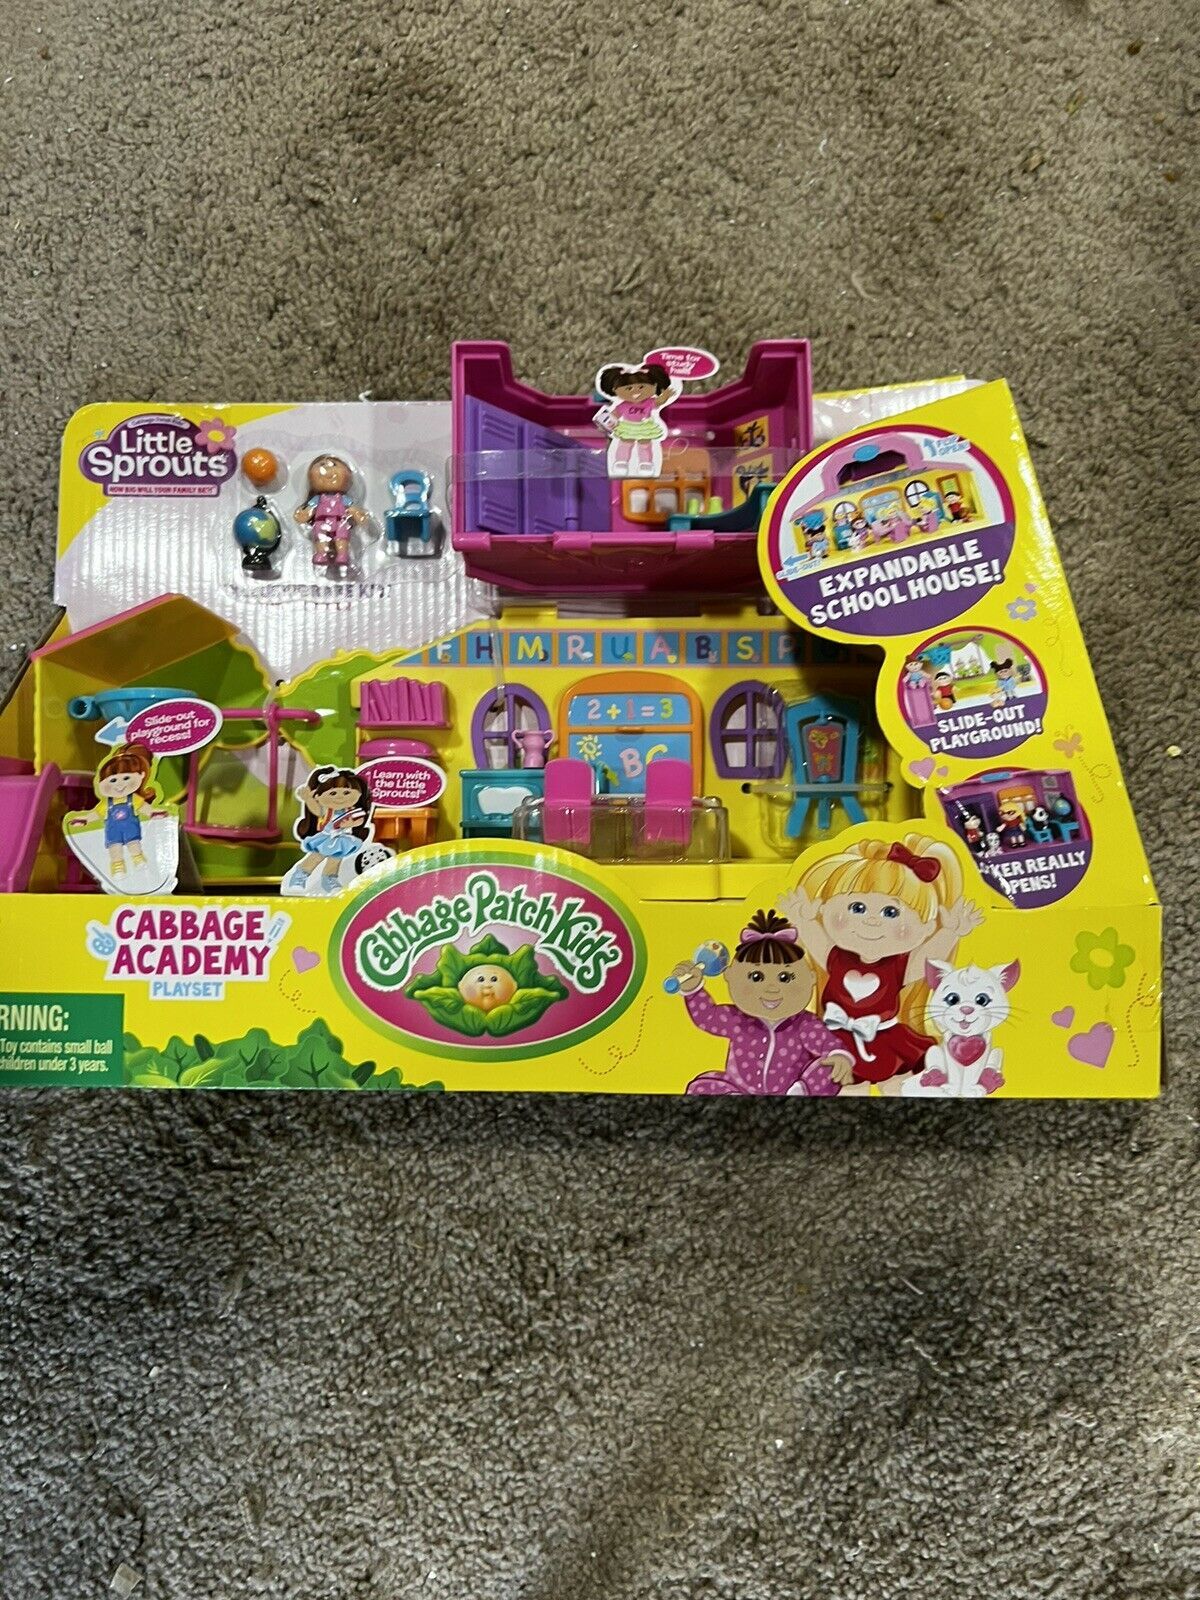 Cabbage Patch Kids Cabbage Academy Playset - Box  Bent On One Side - $27.15